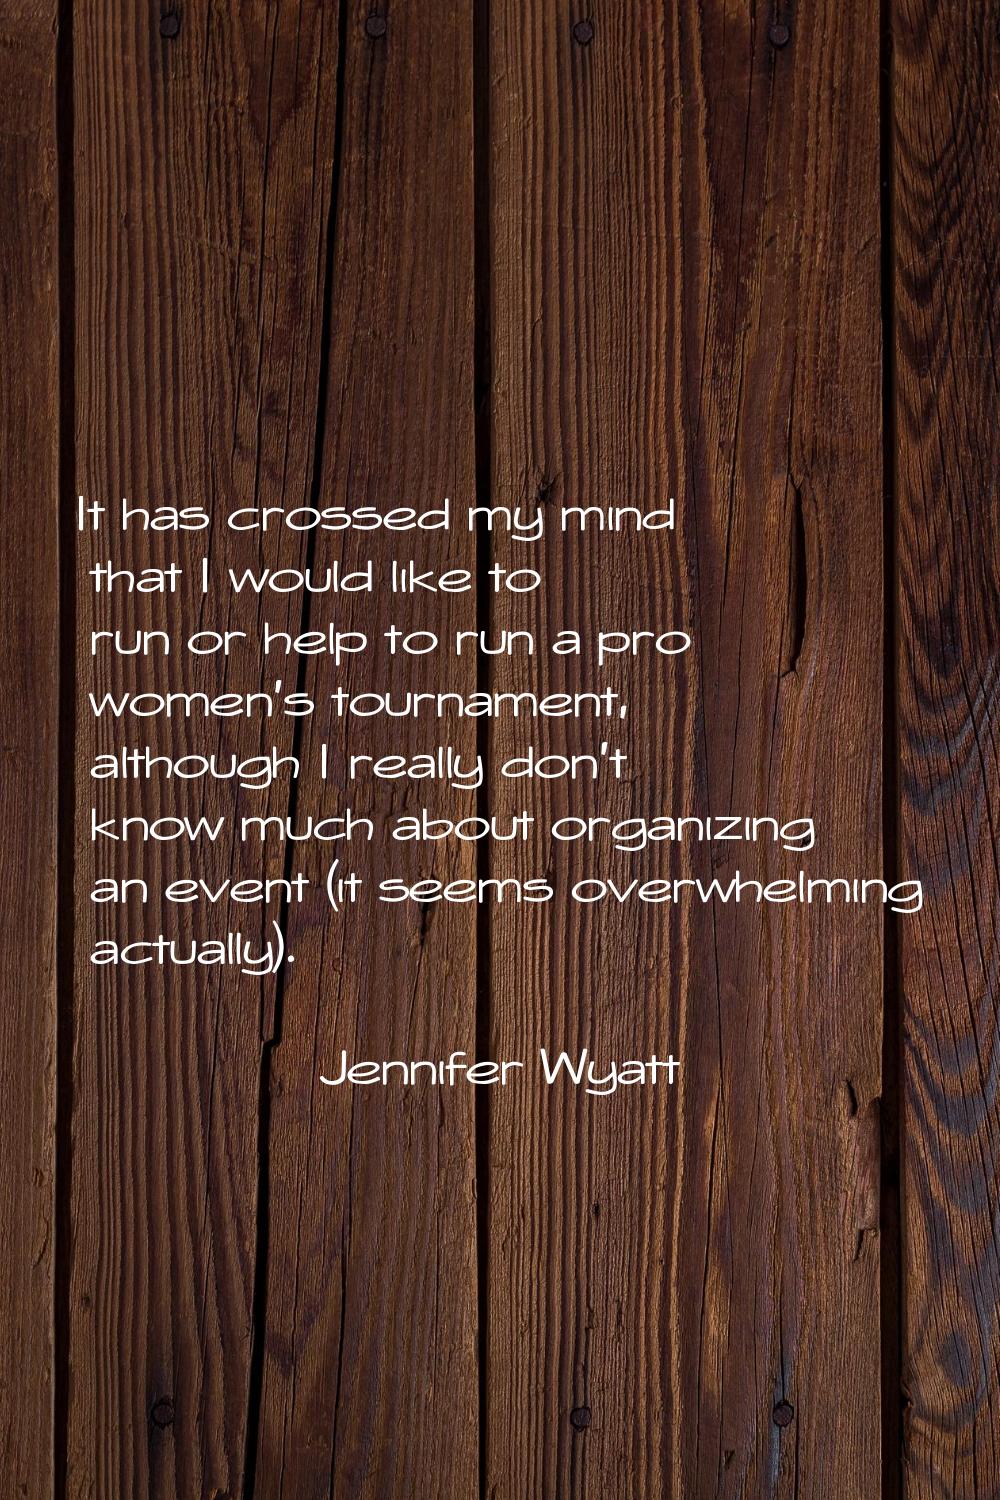 It has crossed my mind that I would like to run or help to run a pro women's tournament, although I